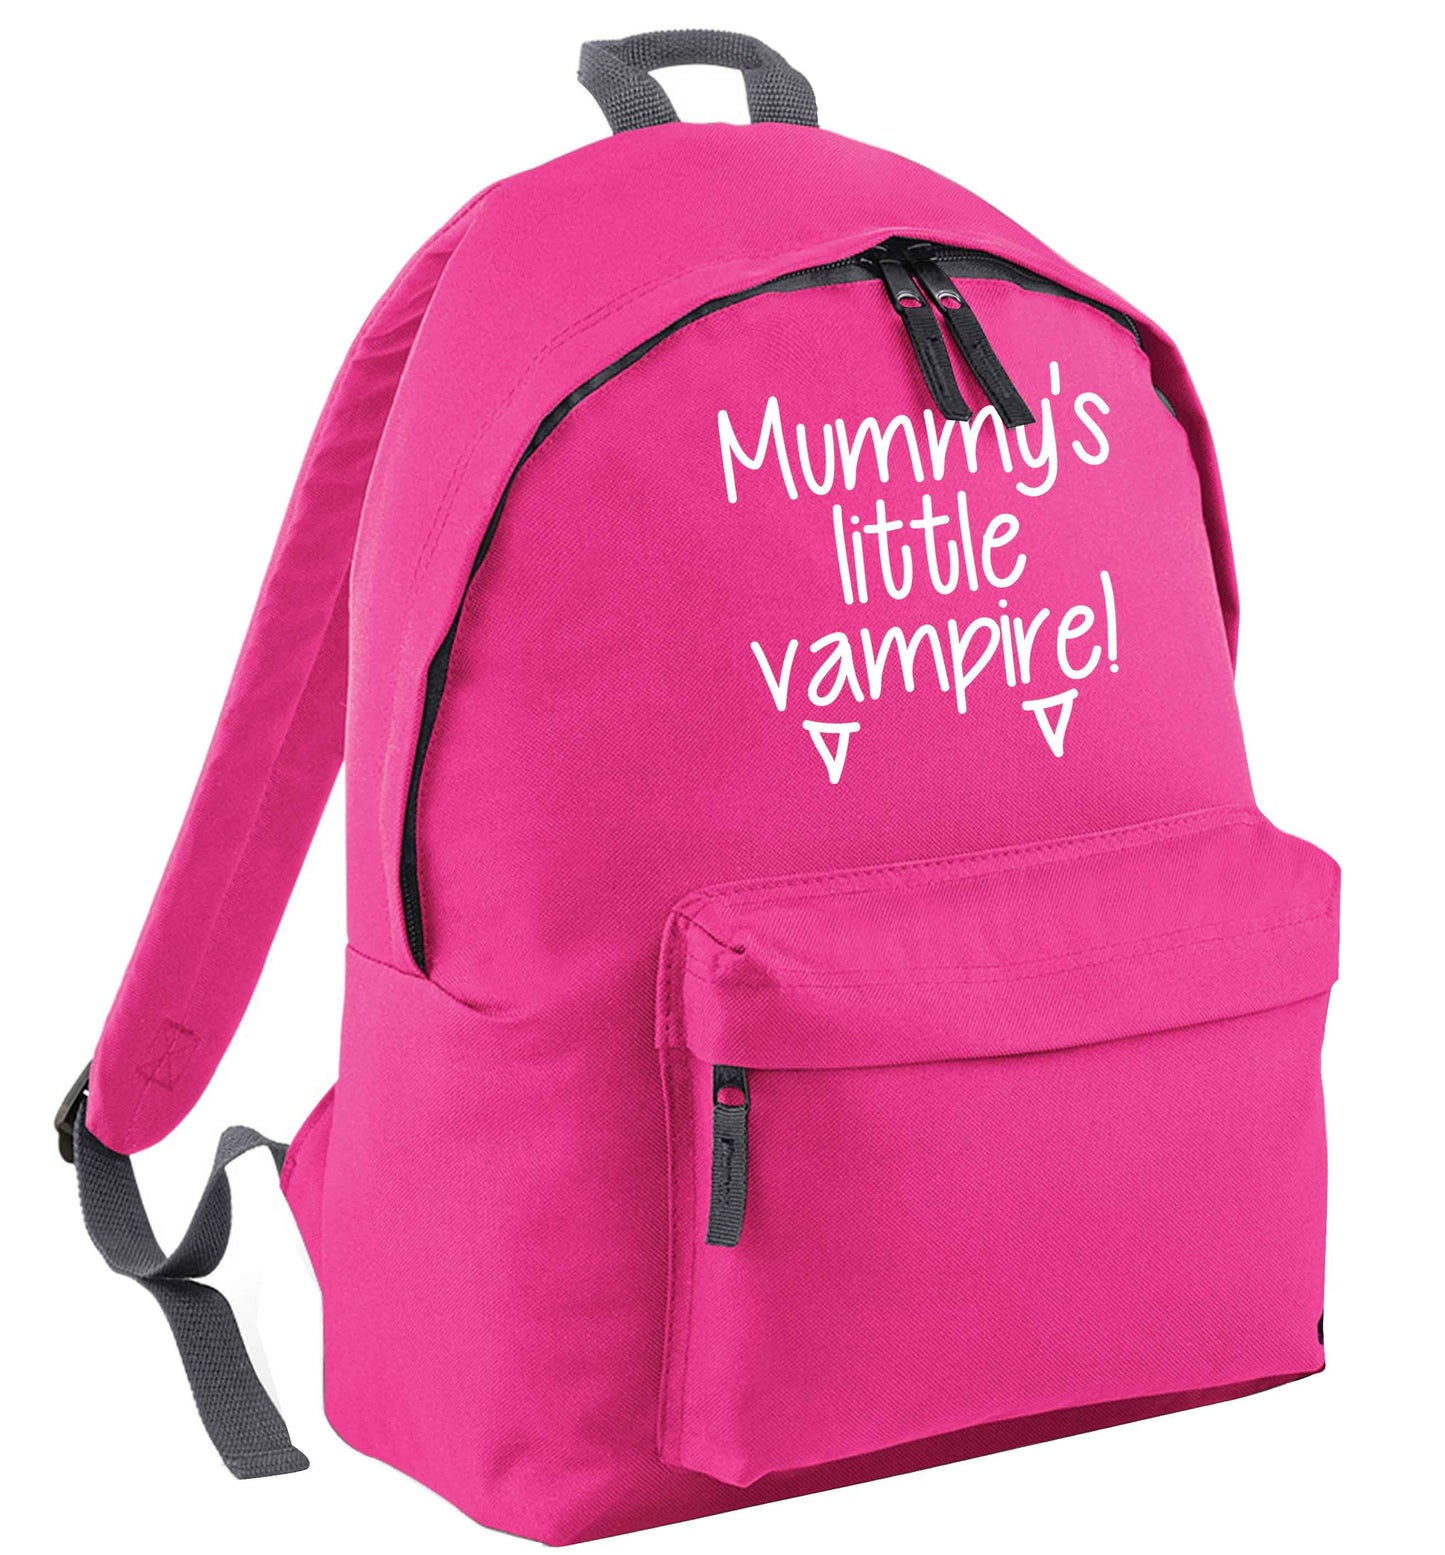 Mummy's little vampire pink adults backpack